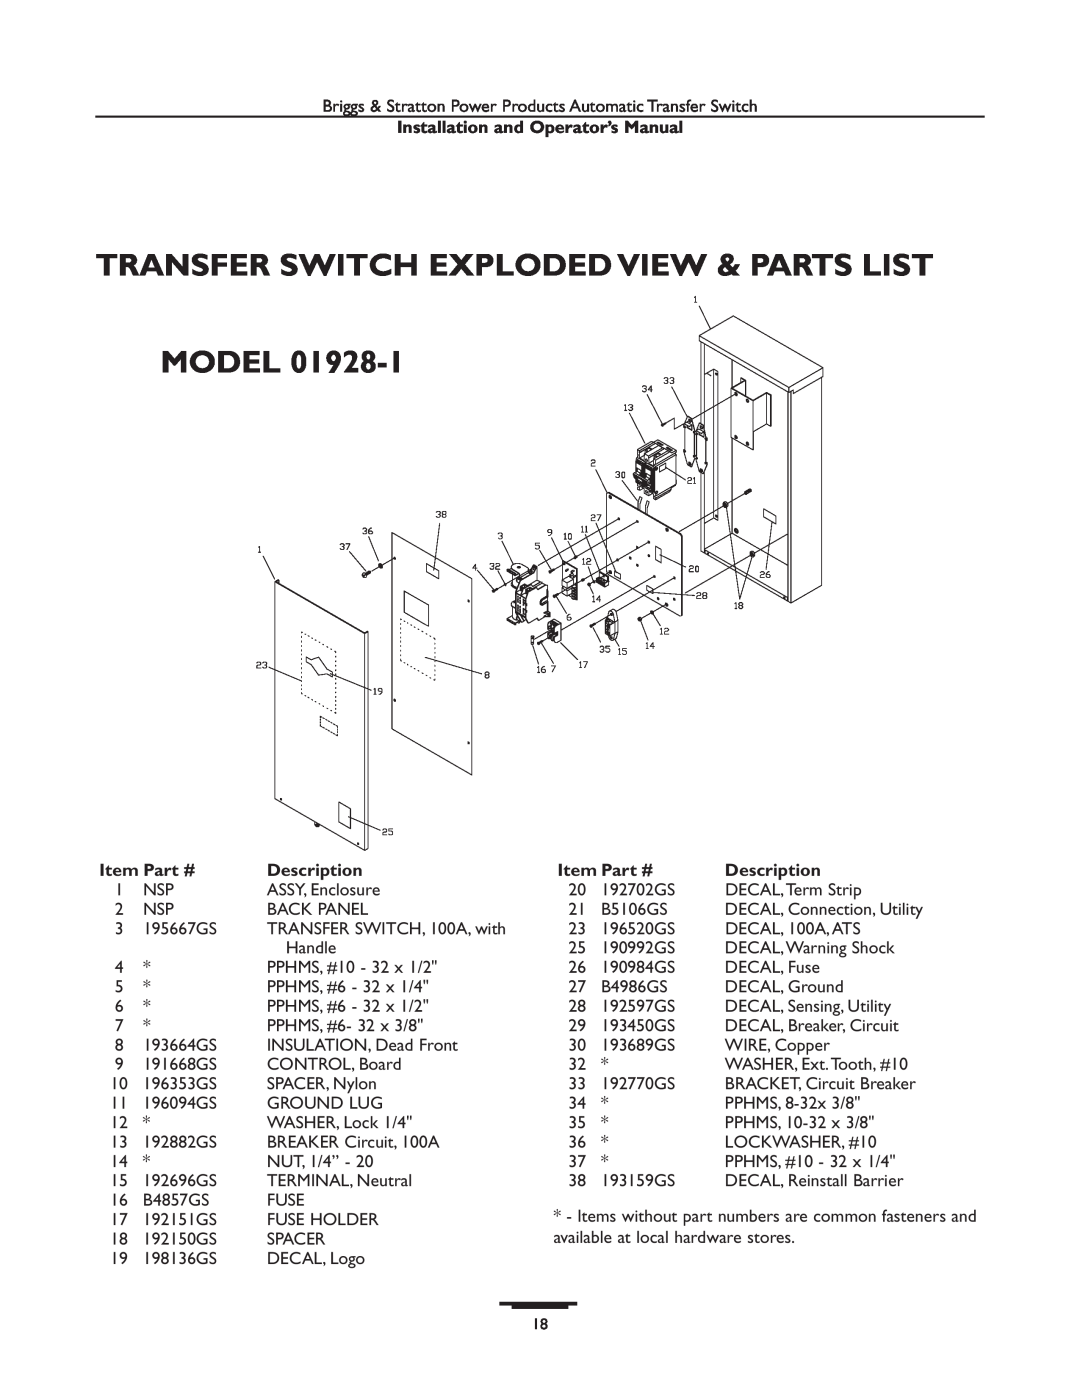 Briggs & Stratton 01929-1, 01928-1 Transfer Switch Exploded View & Parts List Model, Installation and Operator’s Manual 